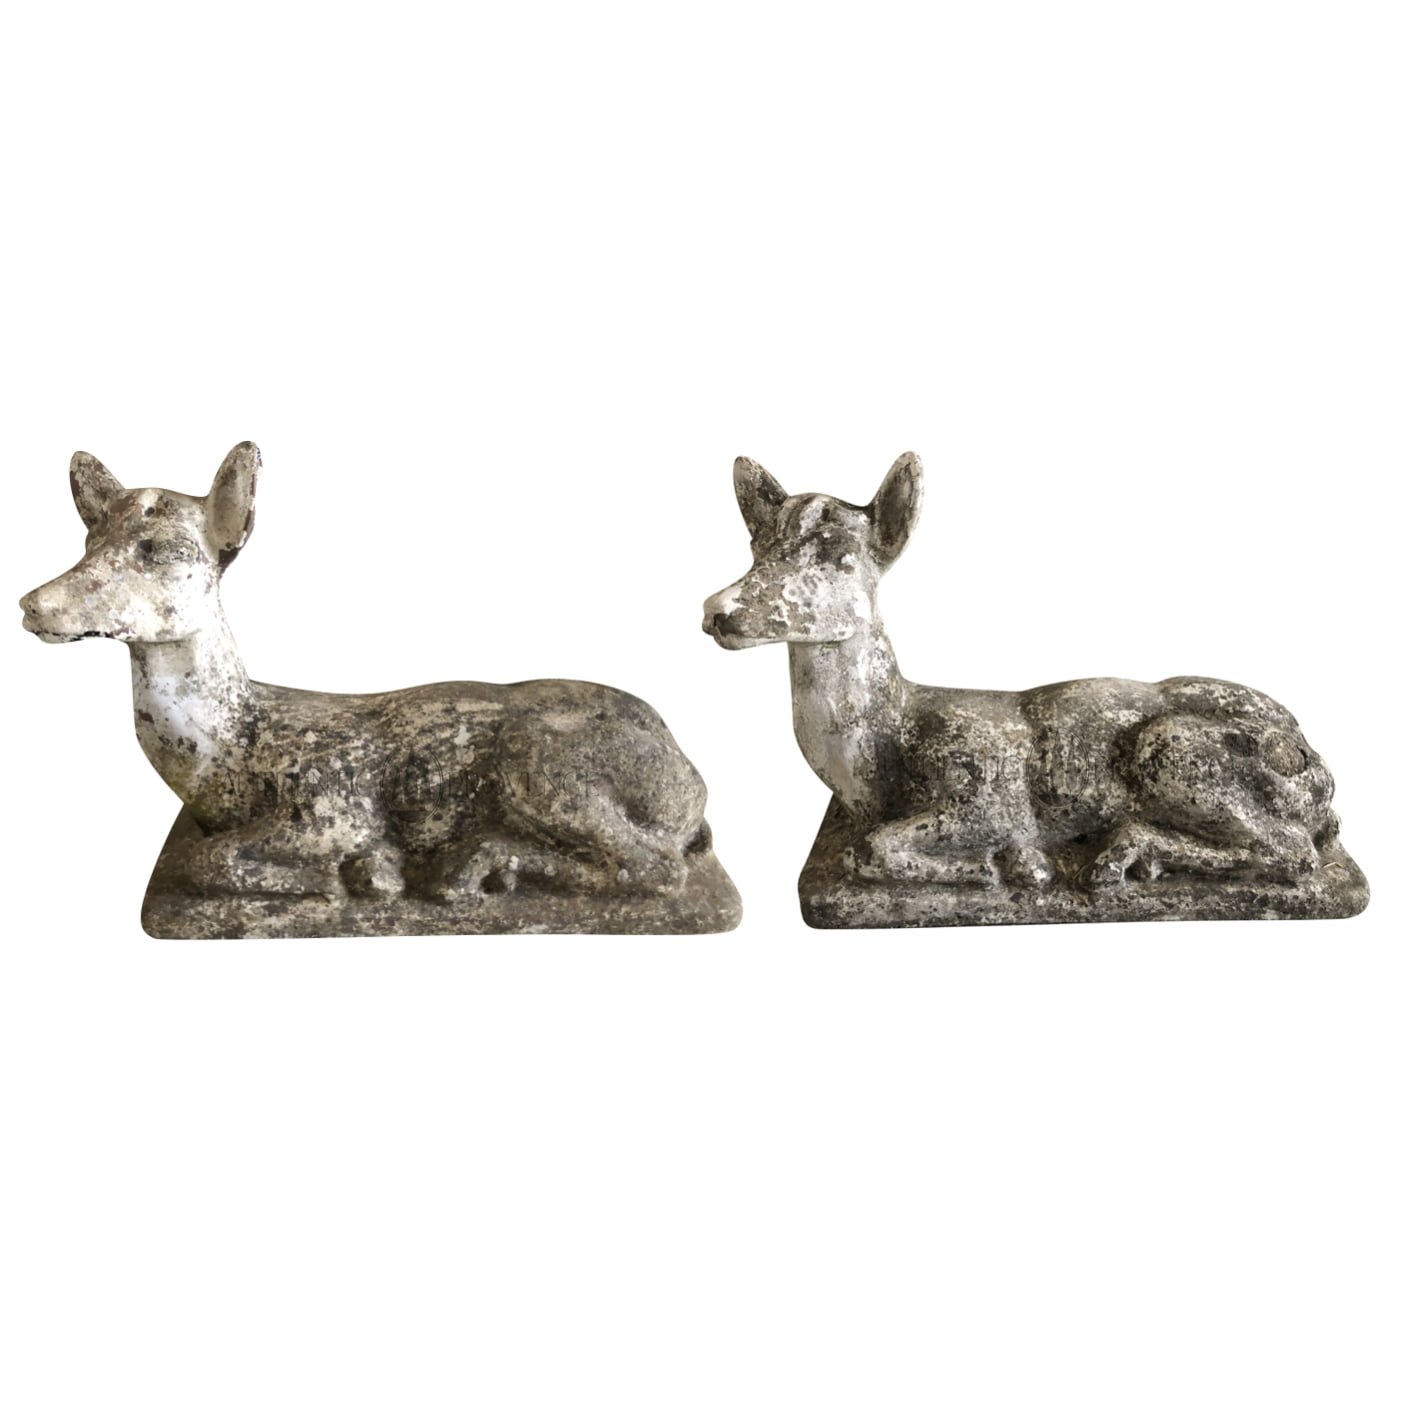 20th Century French Stone Deer Garden Statues